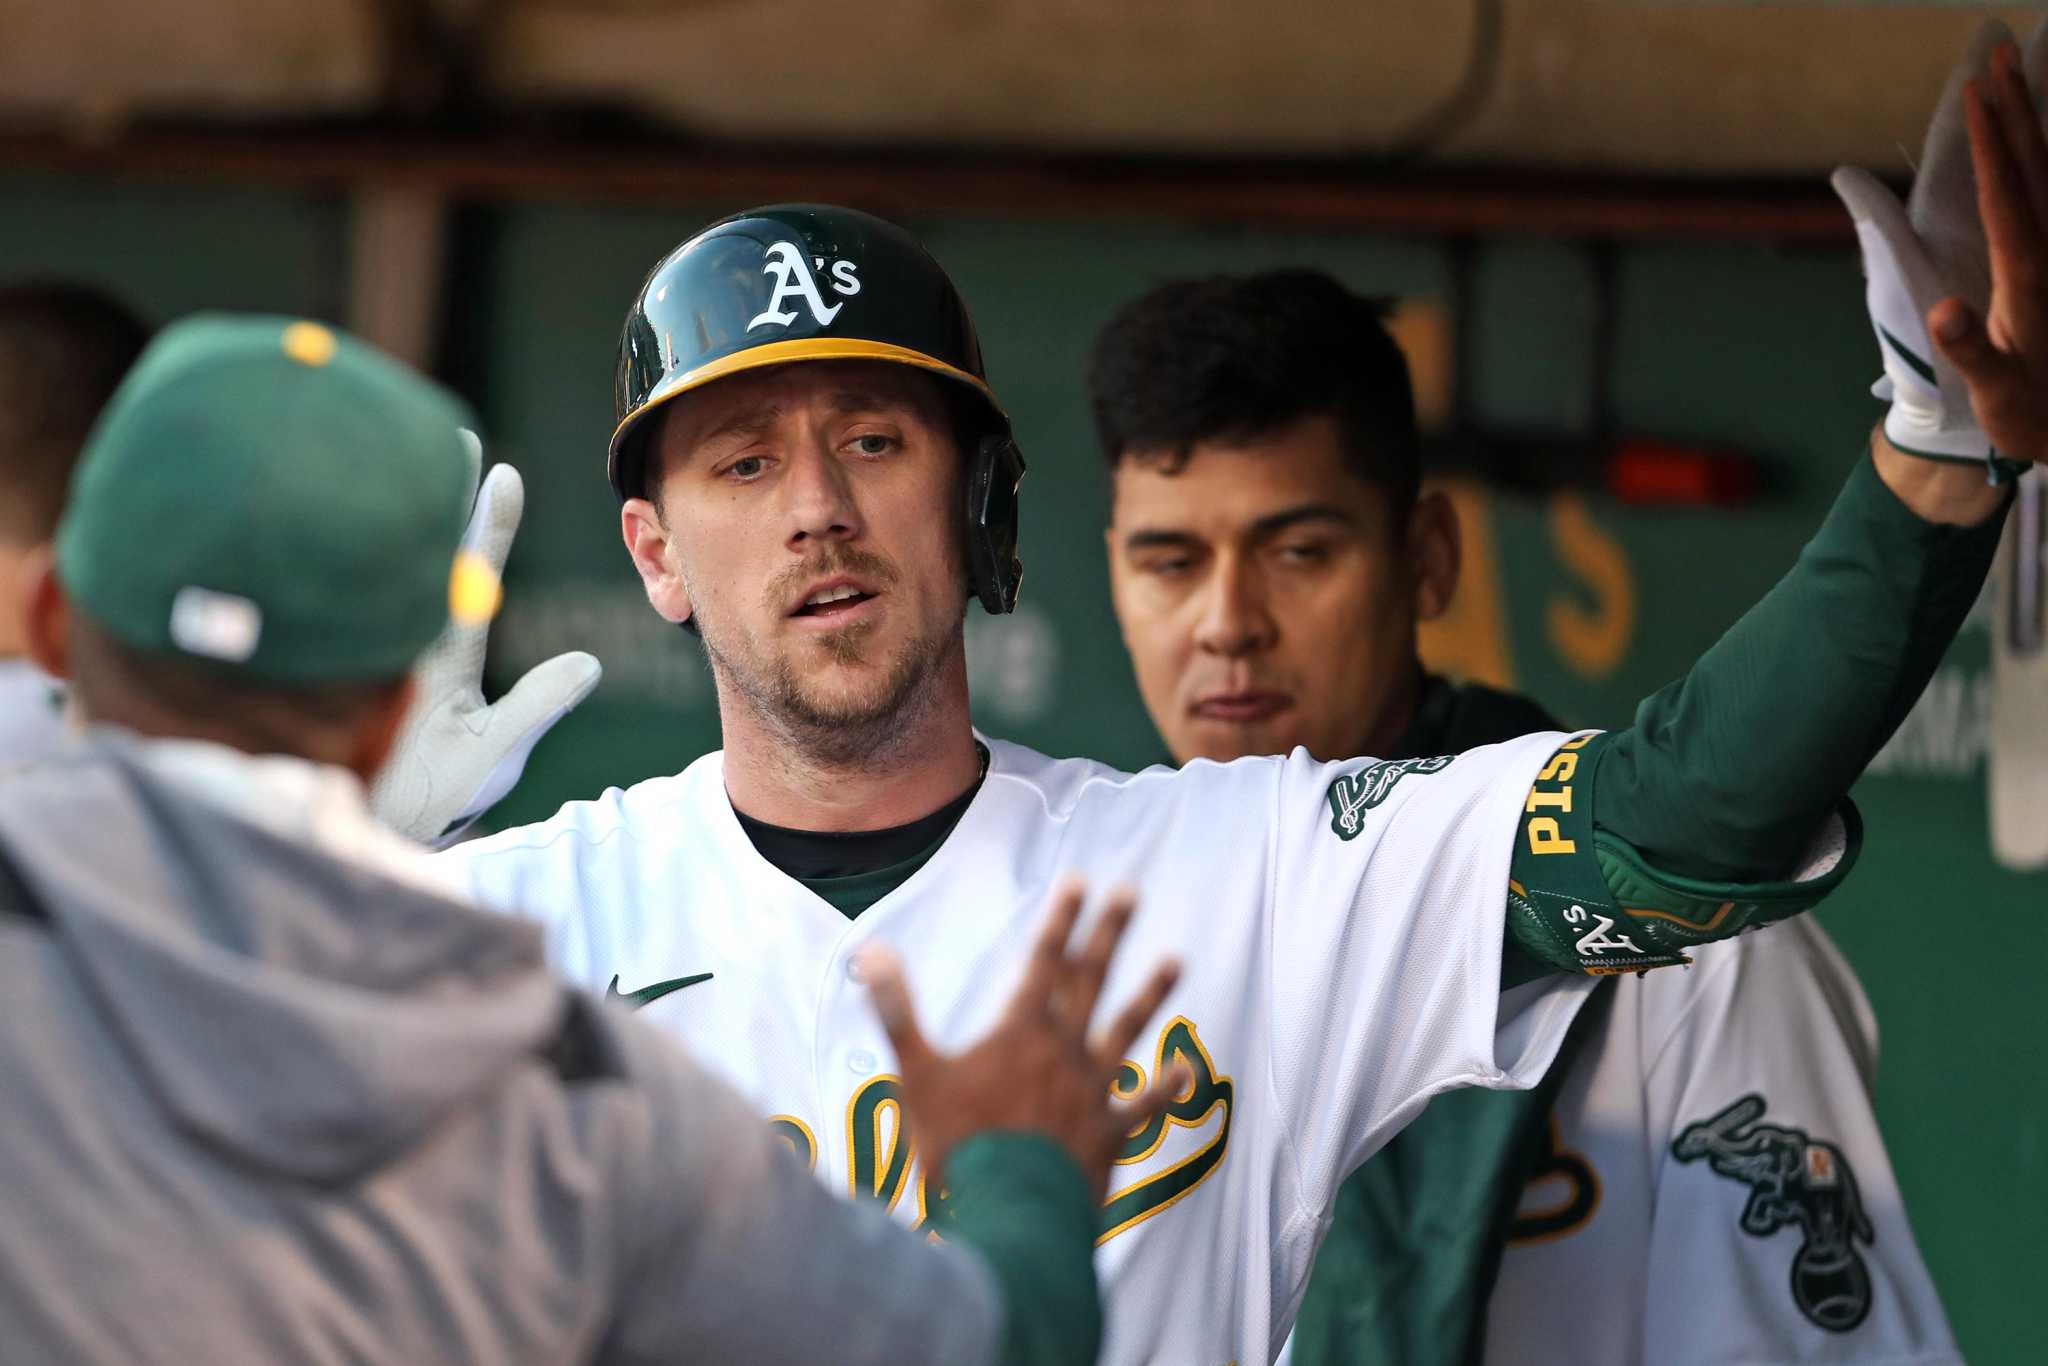 Giants' nonroster list includes former A's outfielder Stephen Piscotty